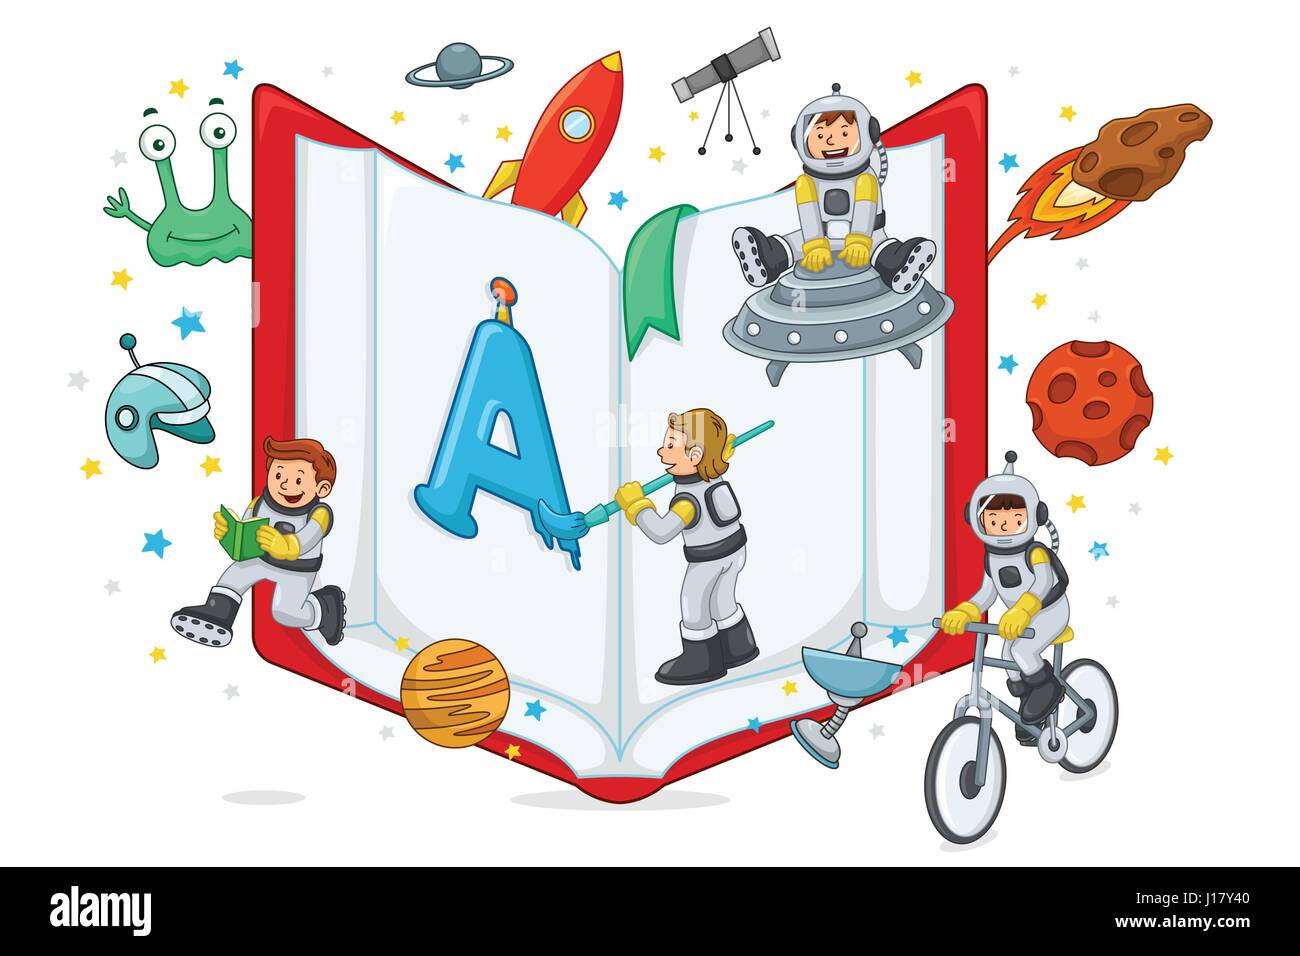 A vector illustration of kids playing and reading with open book Stock Vector